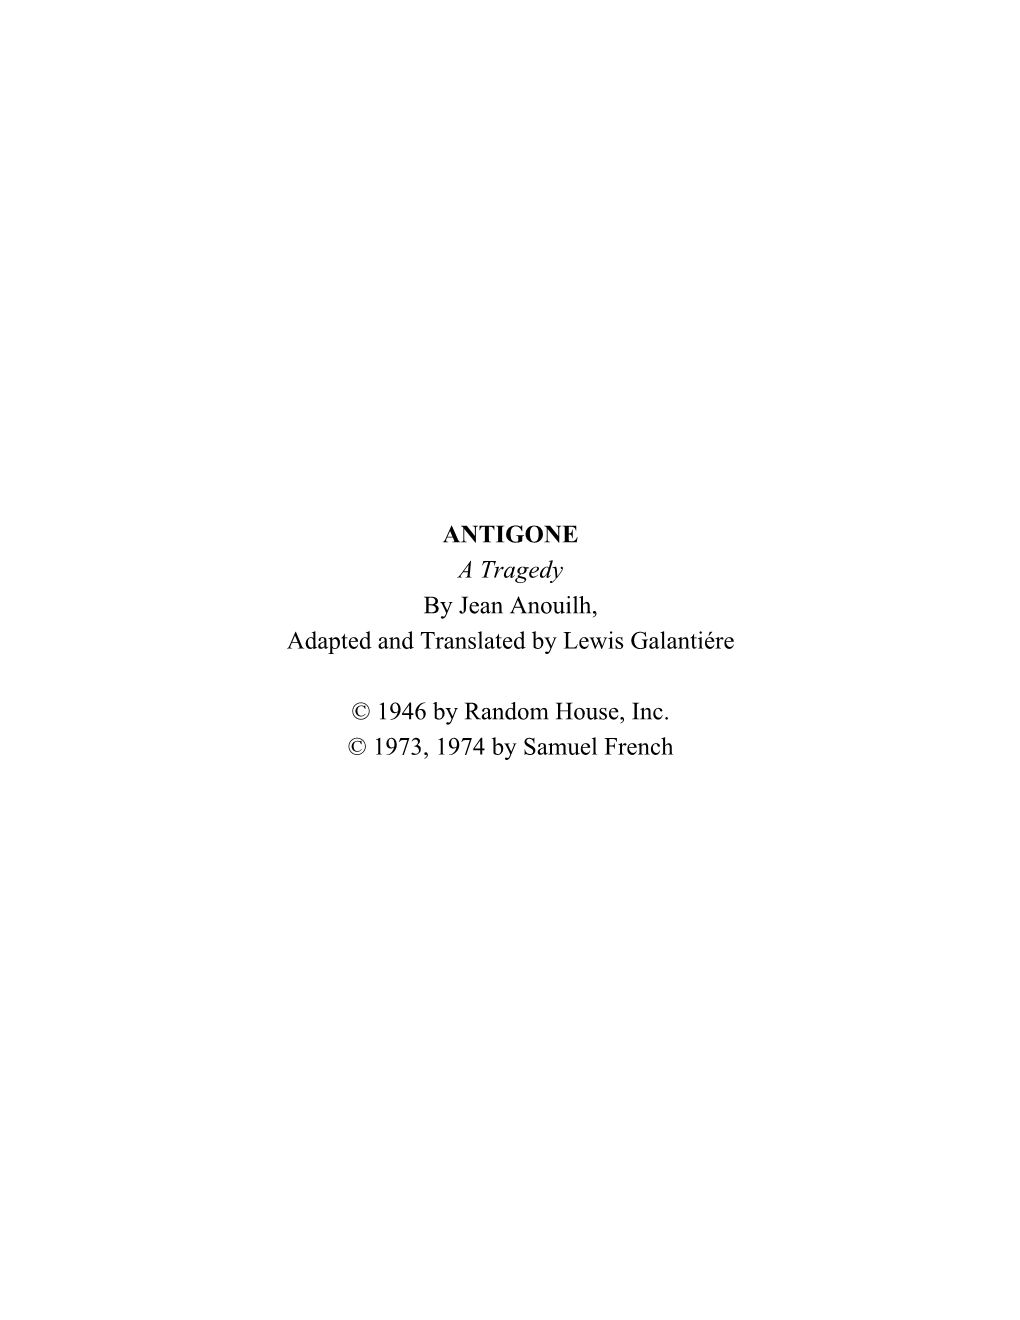 ANTIGONE a Tragedy by Jean Anouilh, Adapted and Translated by Lewis Galantiére